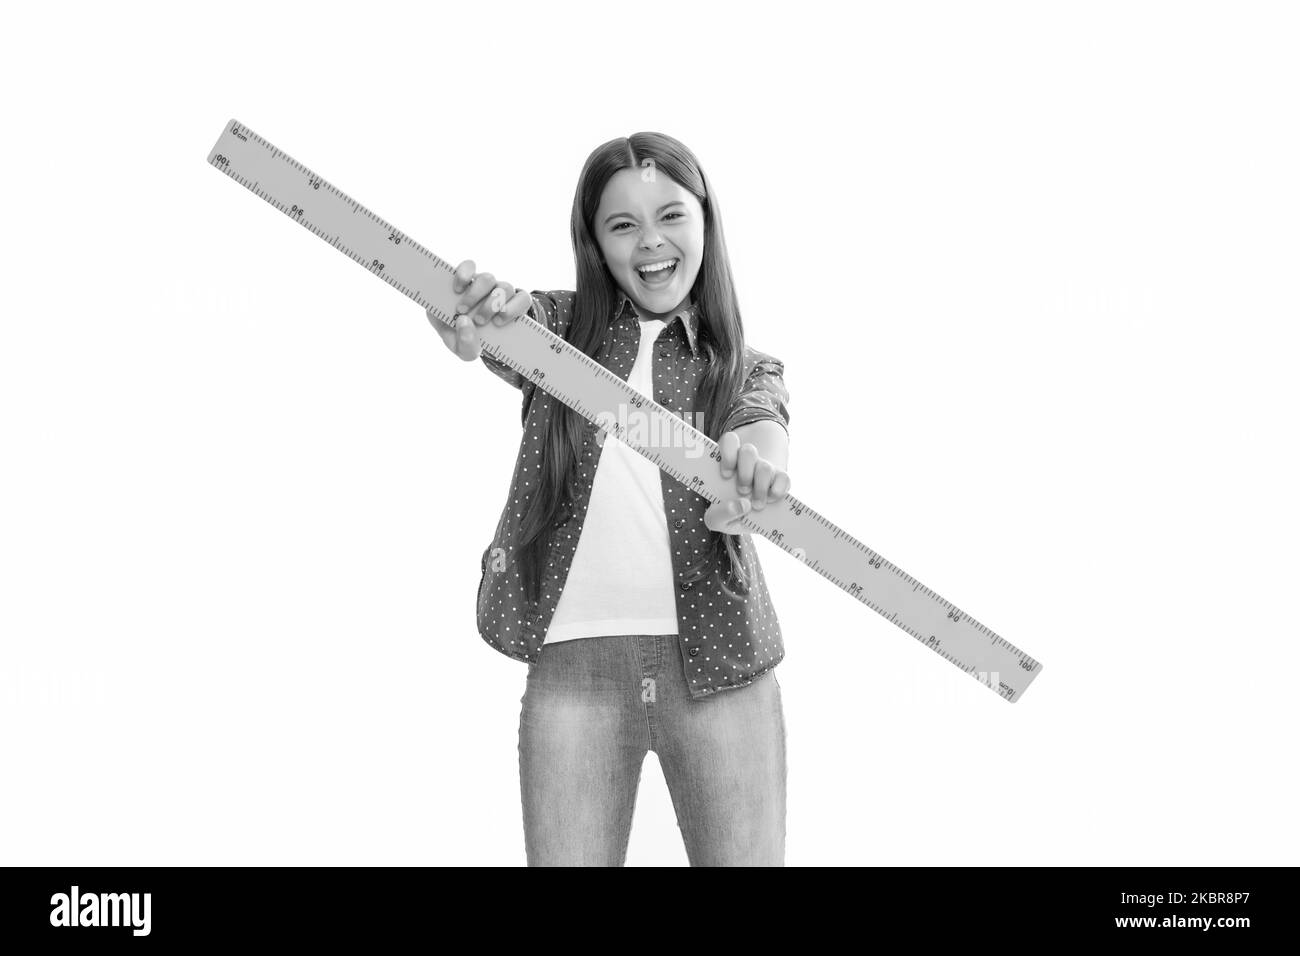 https://c8.alamy.com/comp/2KBR8P7/measuring-and-sizing-education-for-child-mathematics-cheerful-teen-girl-with-ruler-2KBR8P7.jpg